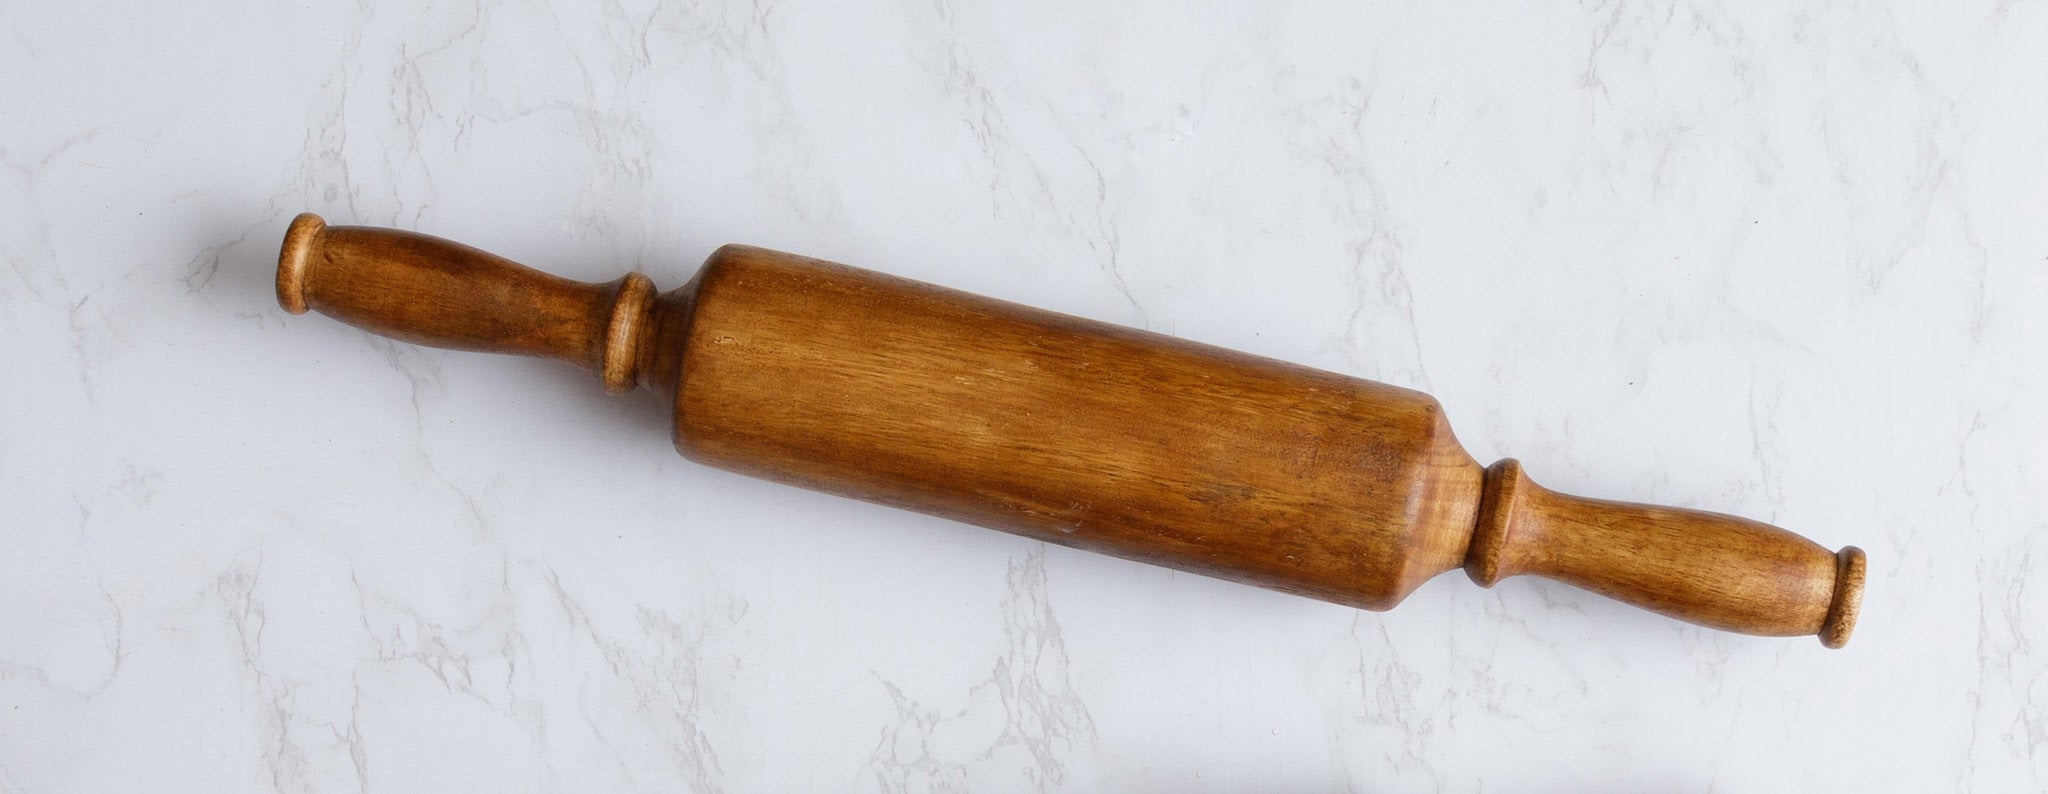 Antique Style Rolling Pin - Style No.1